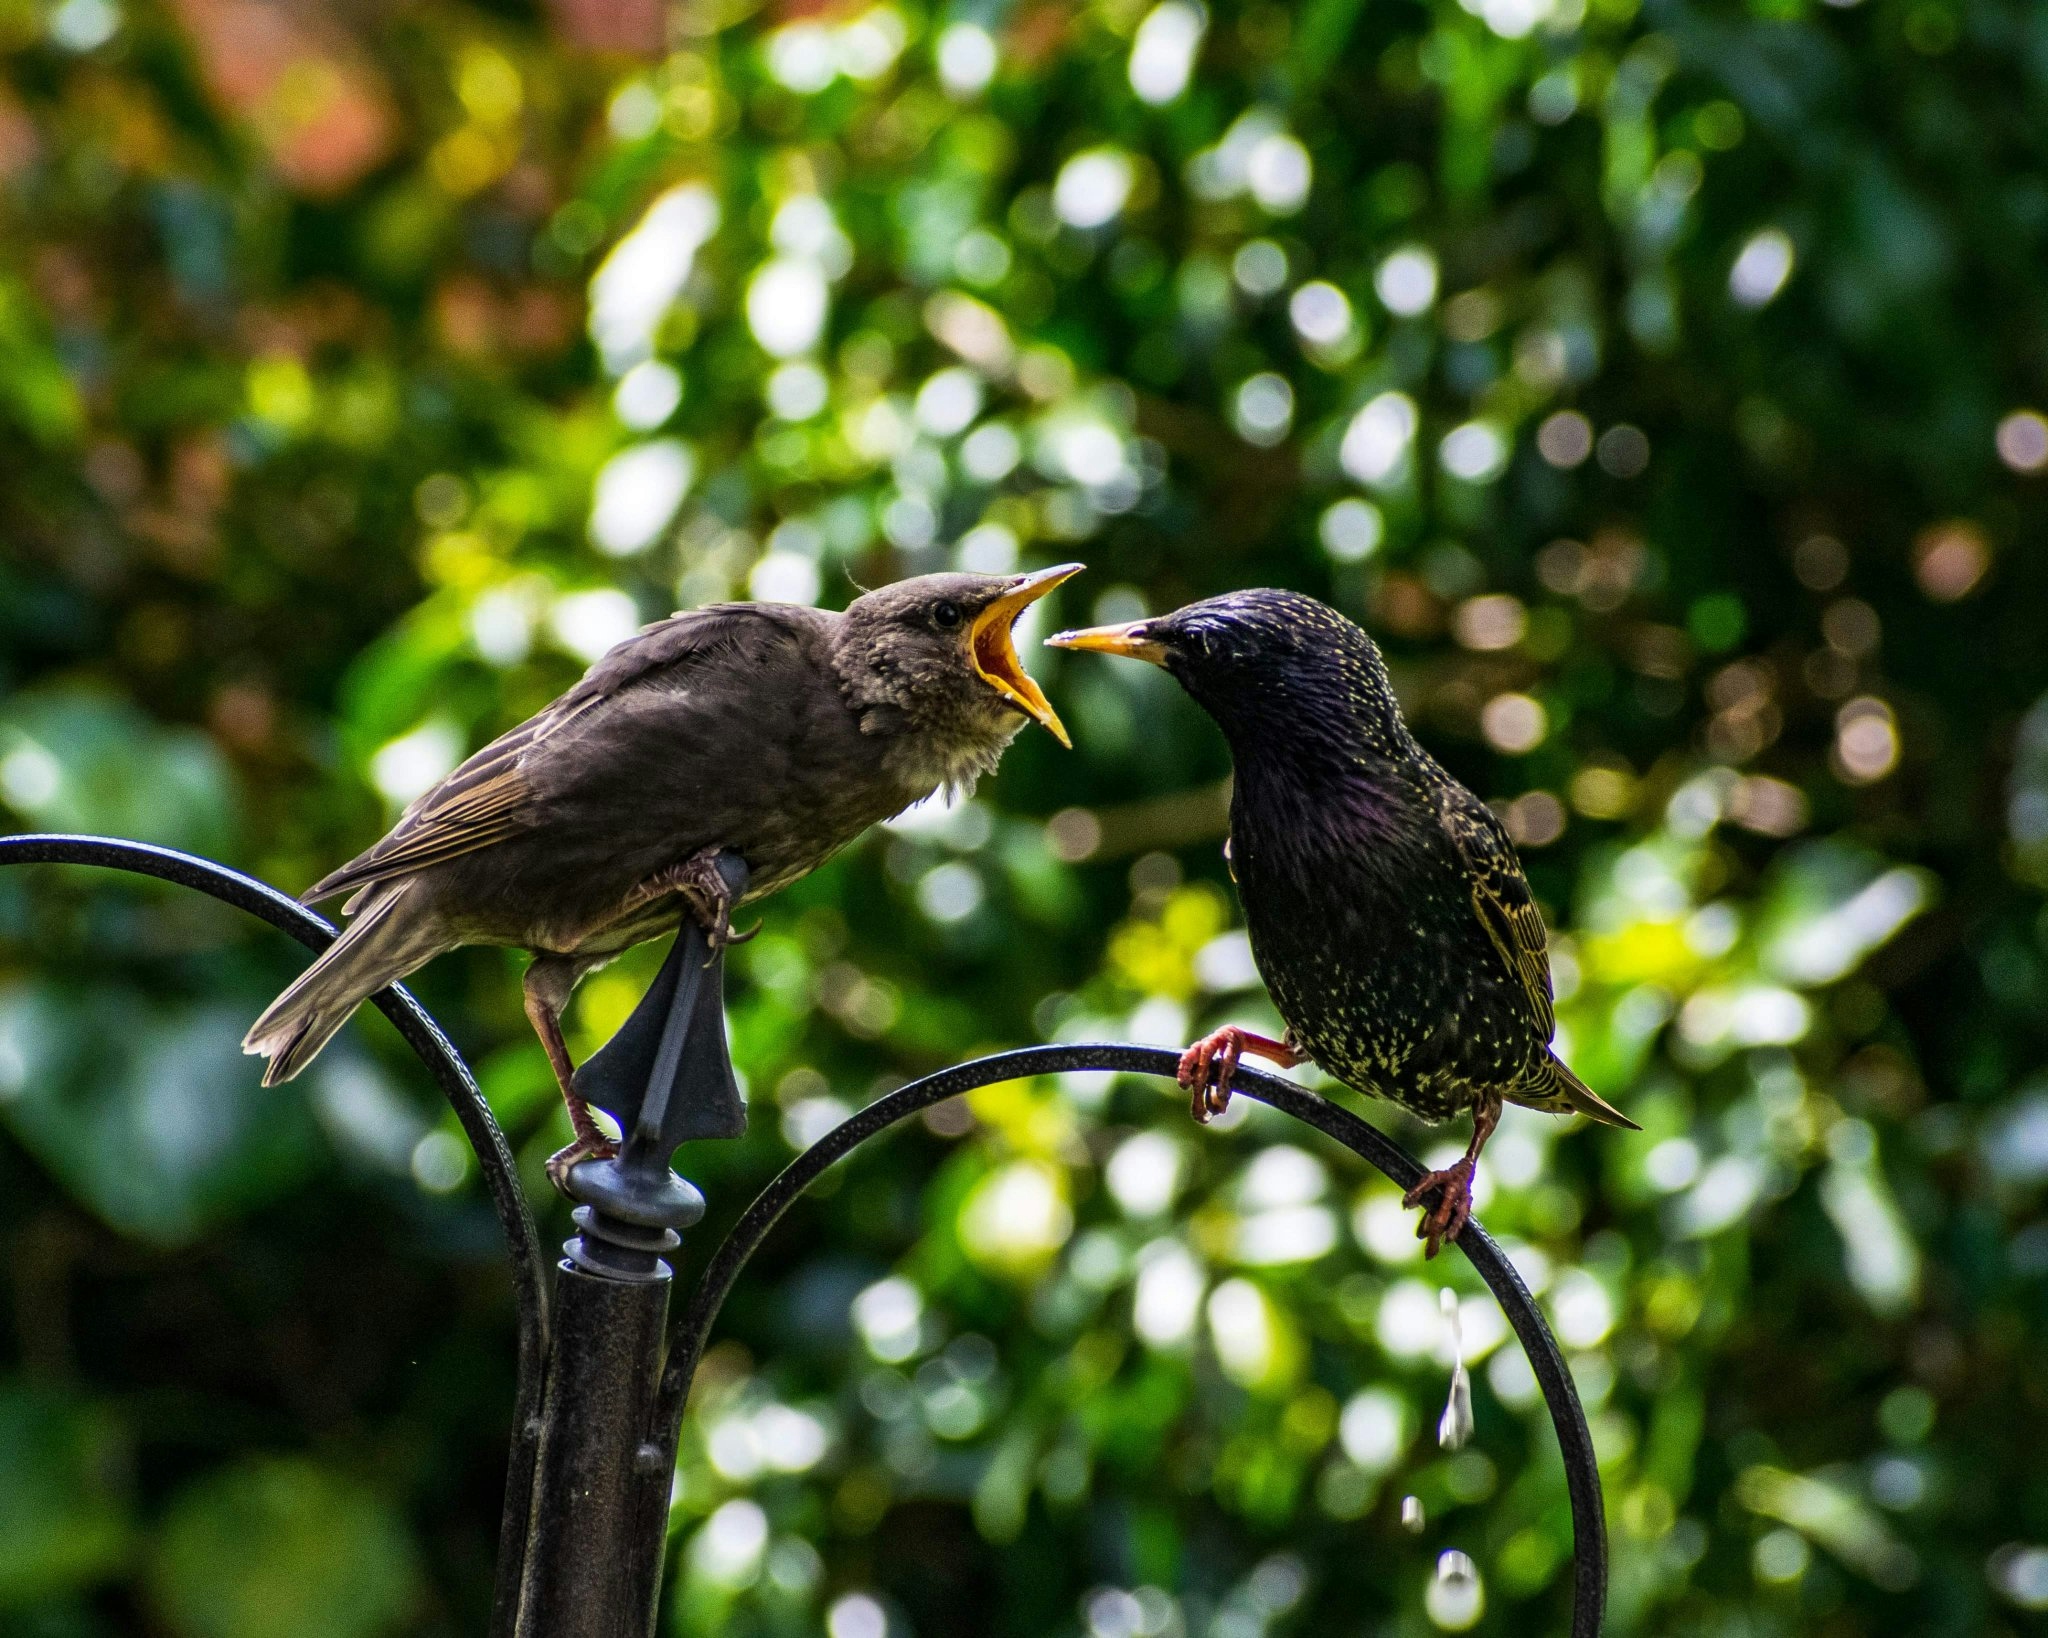 Starling being fed Lucy